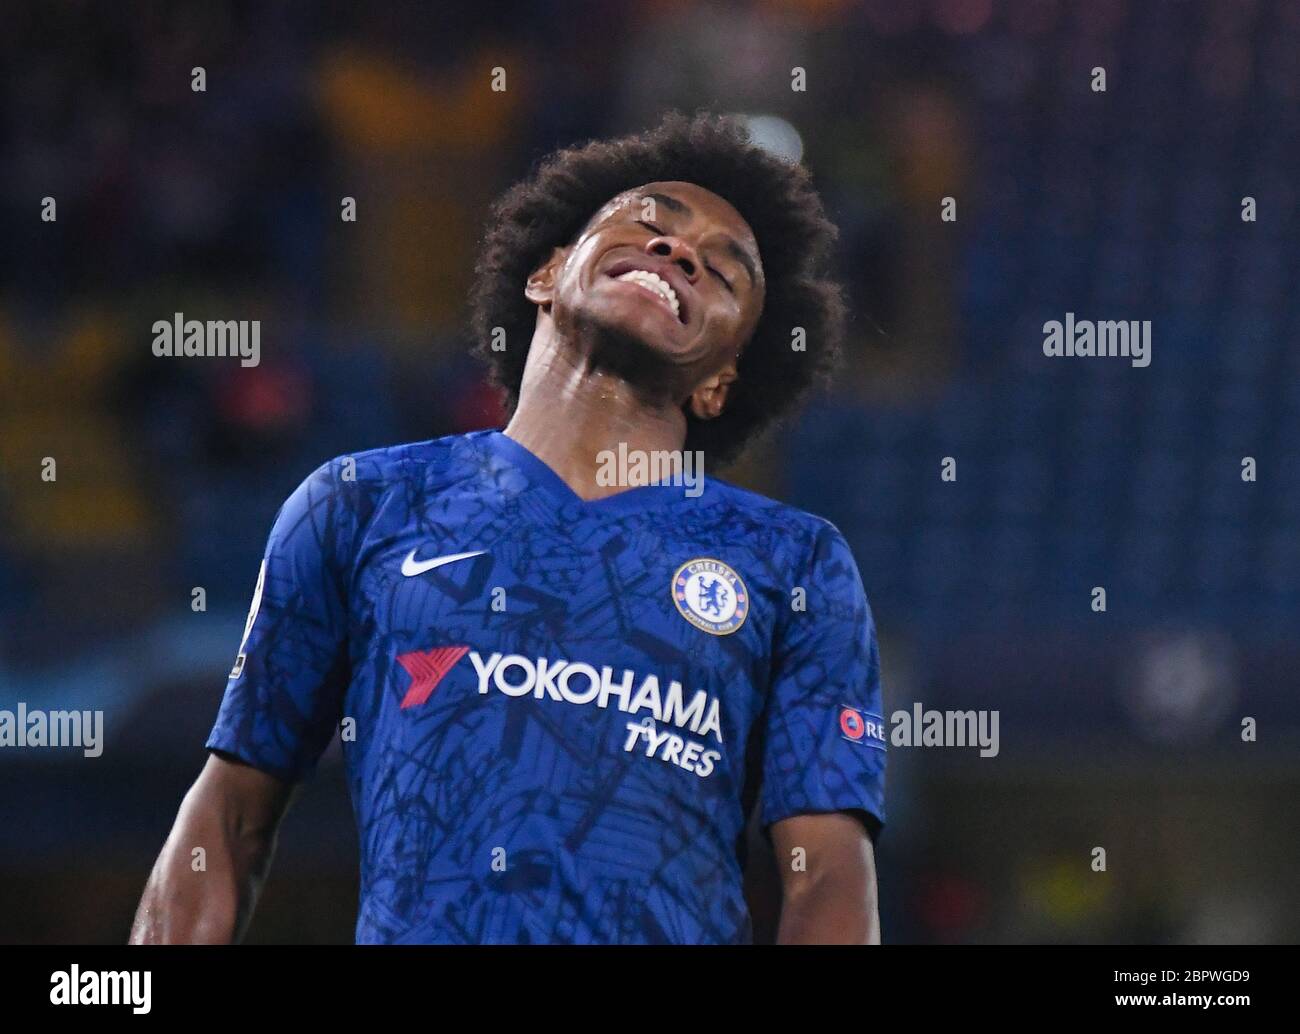 LONDON, ENGLAND - SEPTEMBER 17, 2019: Willian Borges da Silva of Chelsea pictured during the 2019/20 UEFA Champions League Group H game between Chelsea FC (England) and Valencia CF (Spain) at Stamford Bridge. Stock Photo